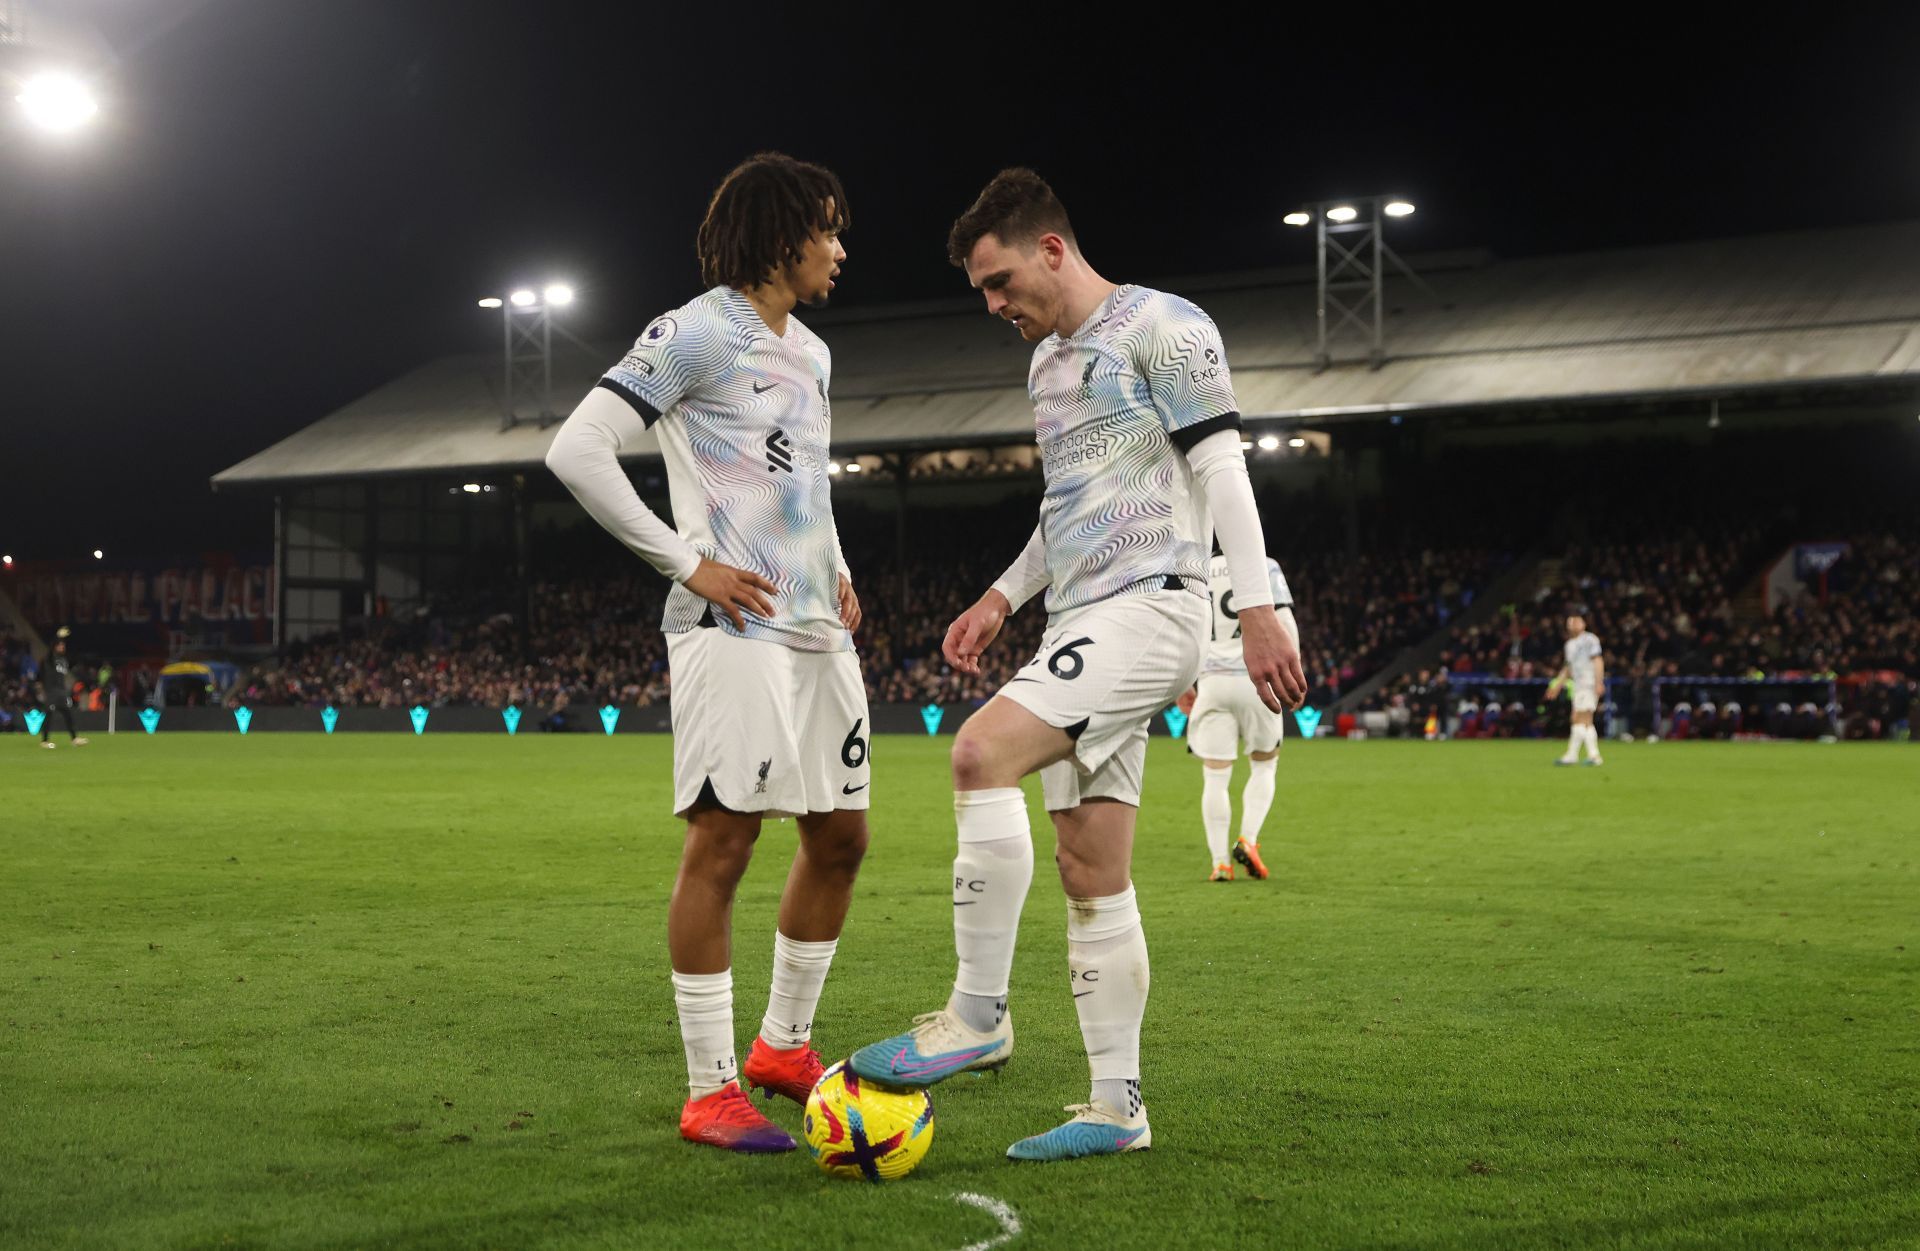 Trent Alexander-Arnold and Andrew Robertson (via Getty Images)